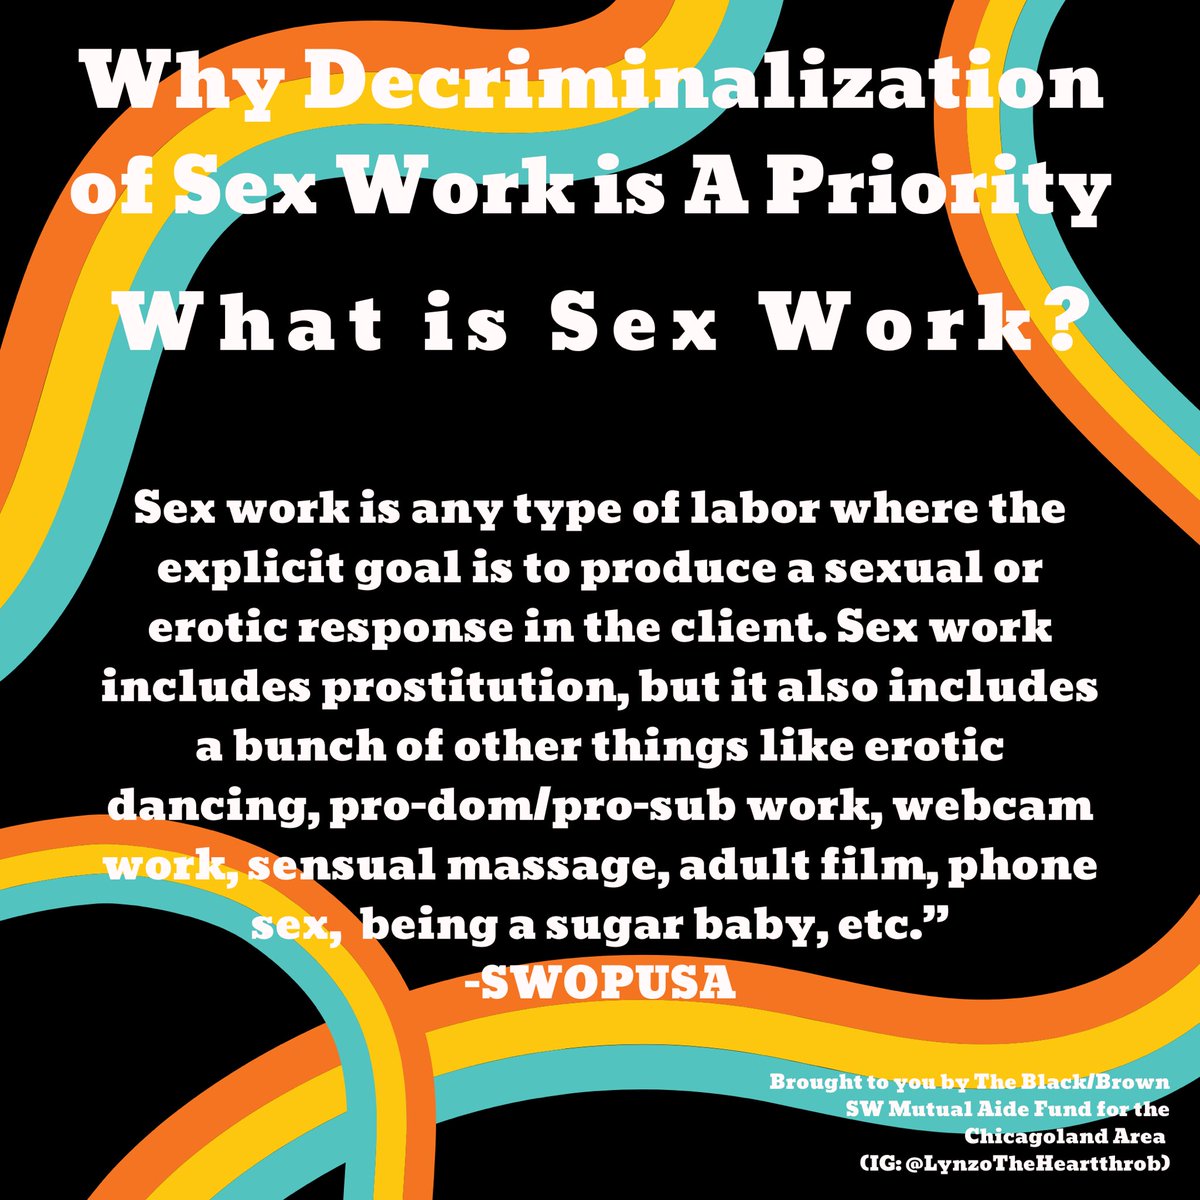 DECRIMINALIZATION OF S*X WORK IS A PRIORITY & HERE’S WHY:- The criminalization of 2 consenting adults benefits NO ONE-Sex Work is any type of labor where the explicit goal is to produce a sexual or erotic response to the client